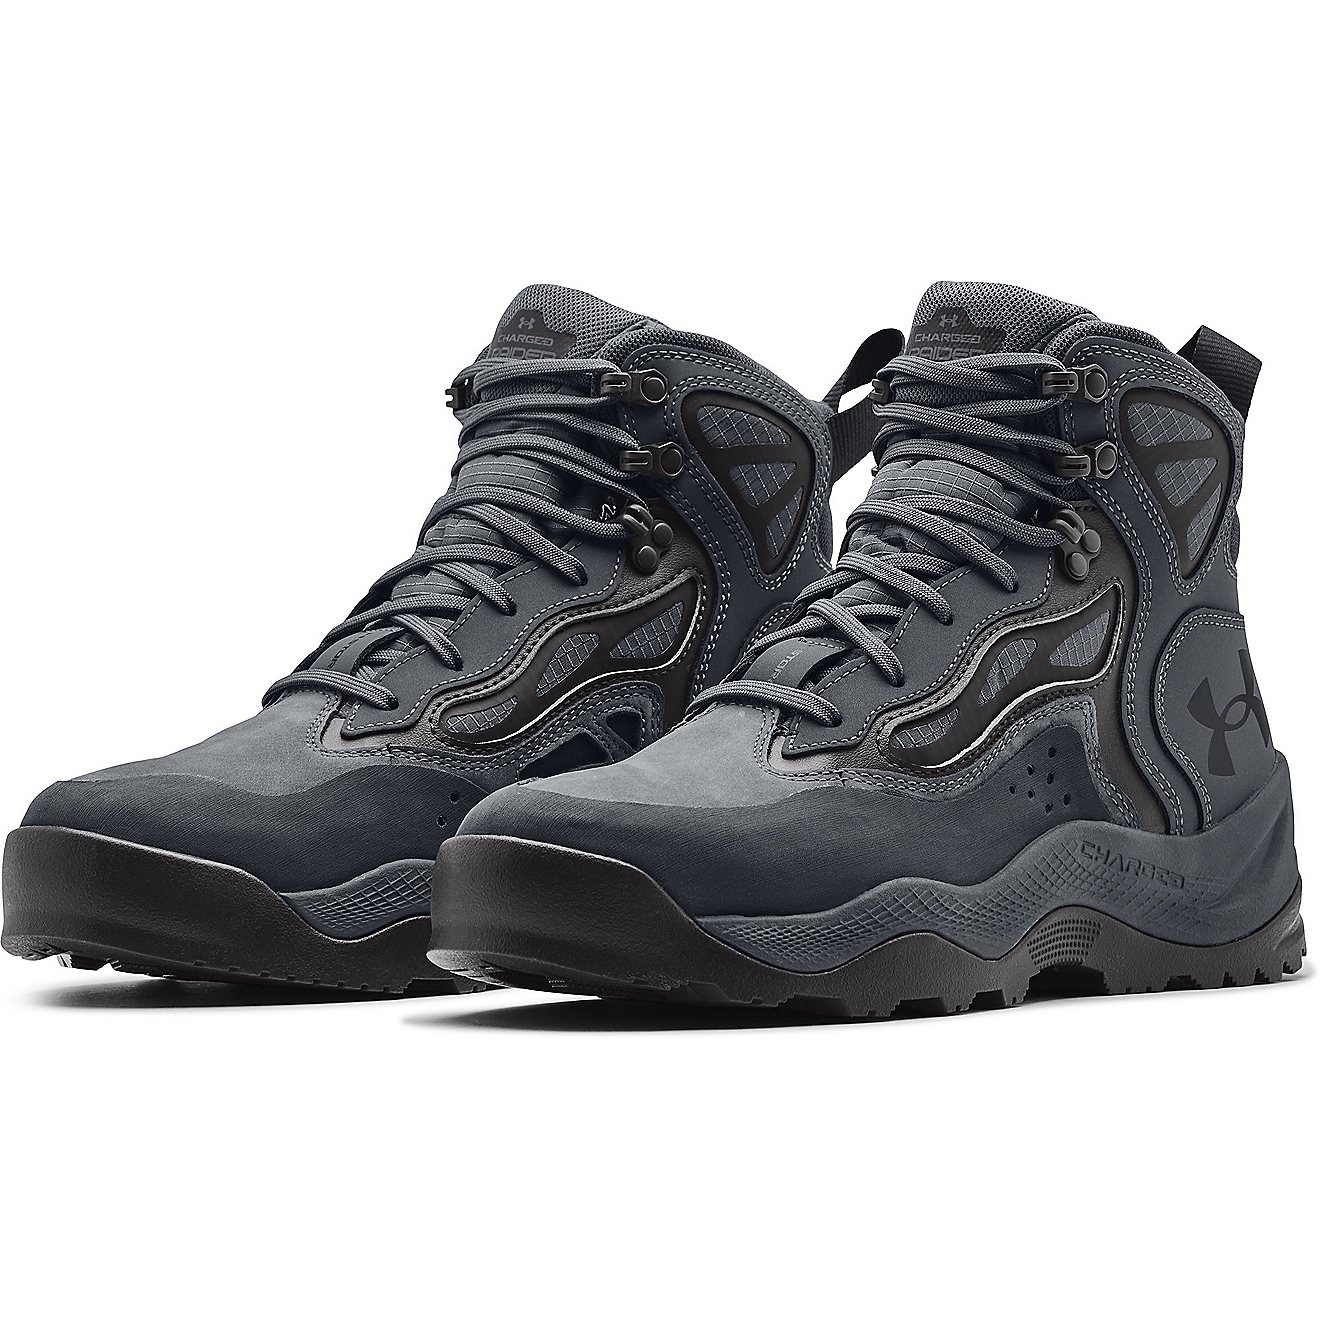 Under Armour Men's Charged Raider Mid Waterproof Hiking Boots                                                                    - view number 2